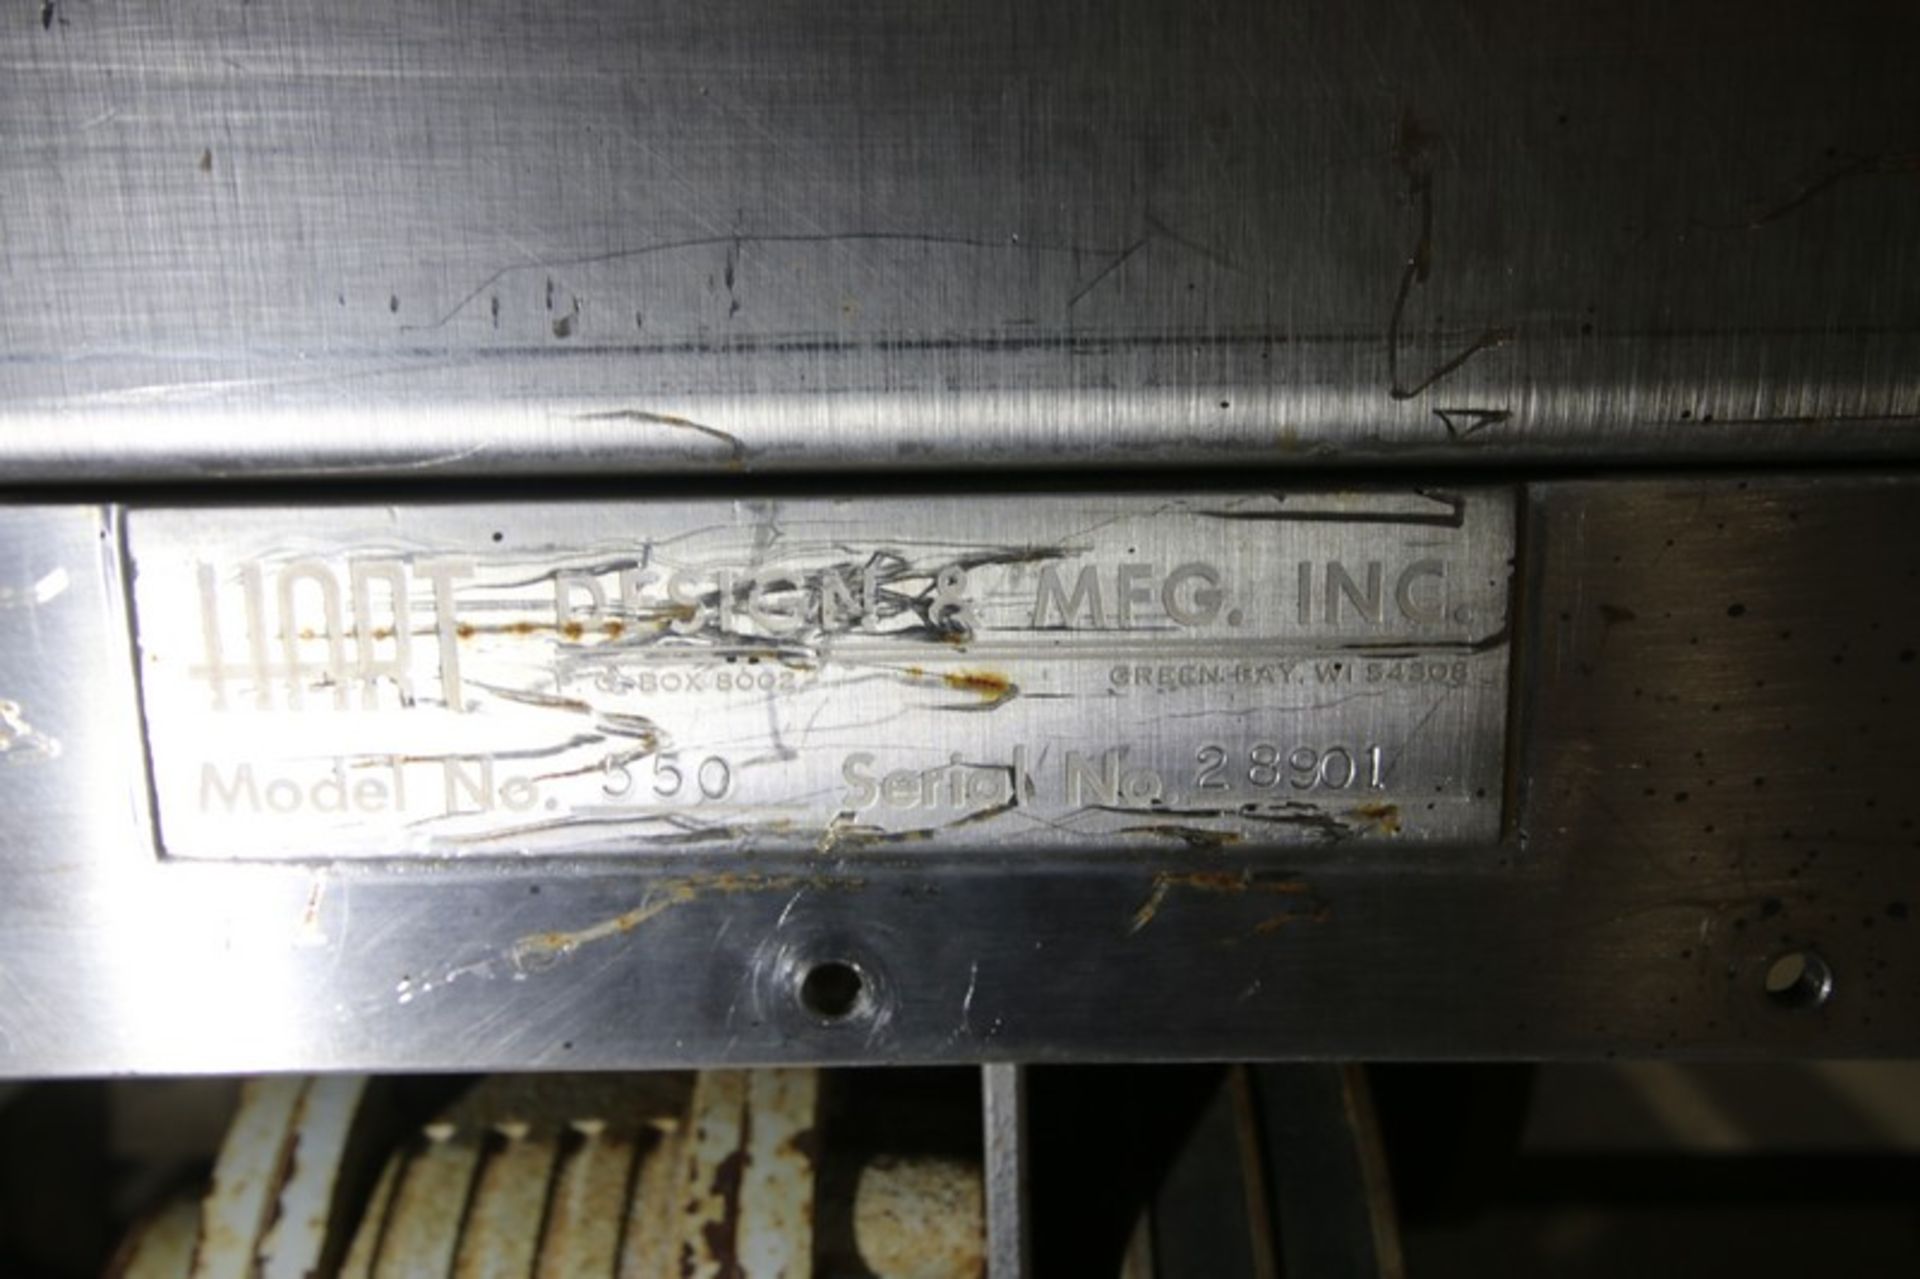 Hart 640 lb S/S Cheese Block Cutter, Model 550, S/N 28901, with 32" W x 6' L Product Opening, - Image 9 of 9